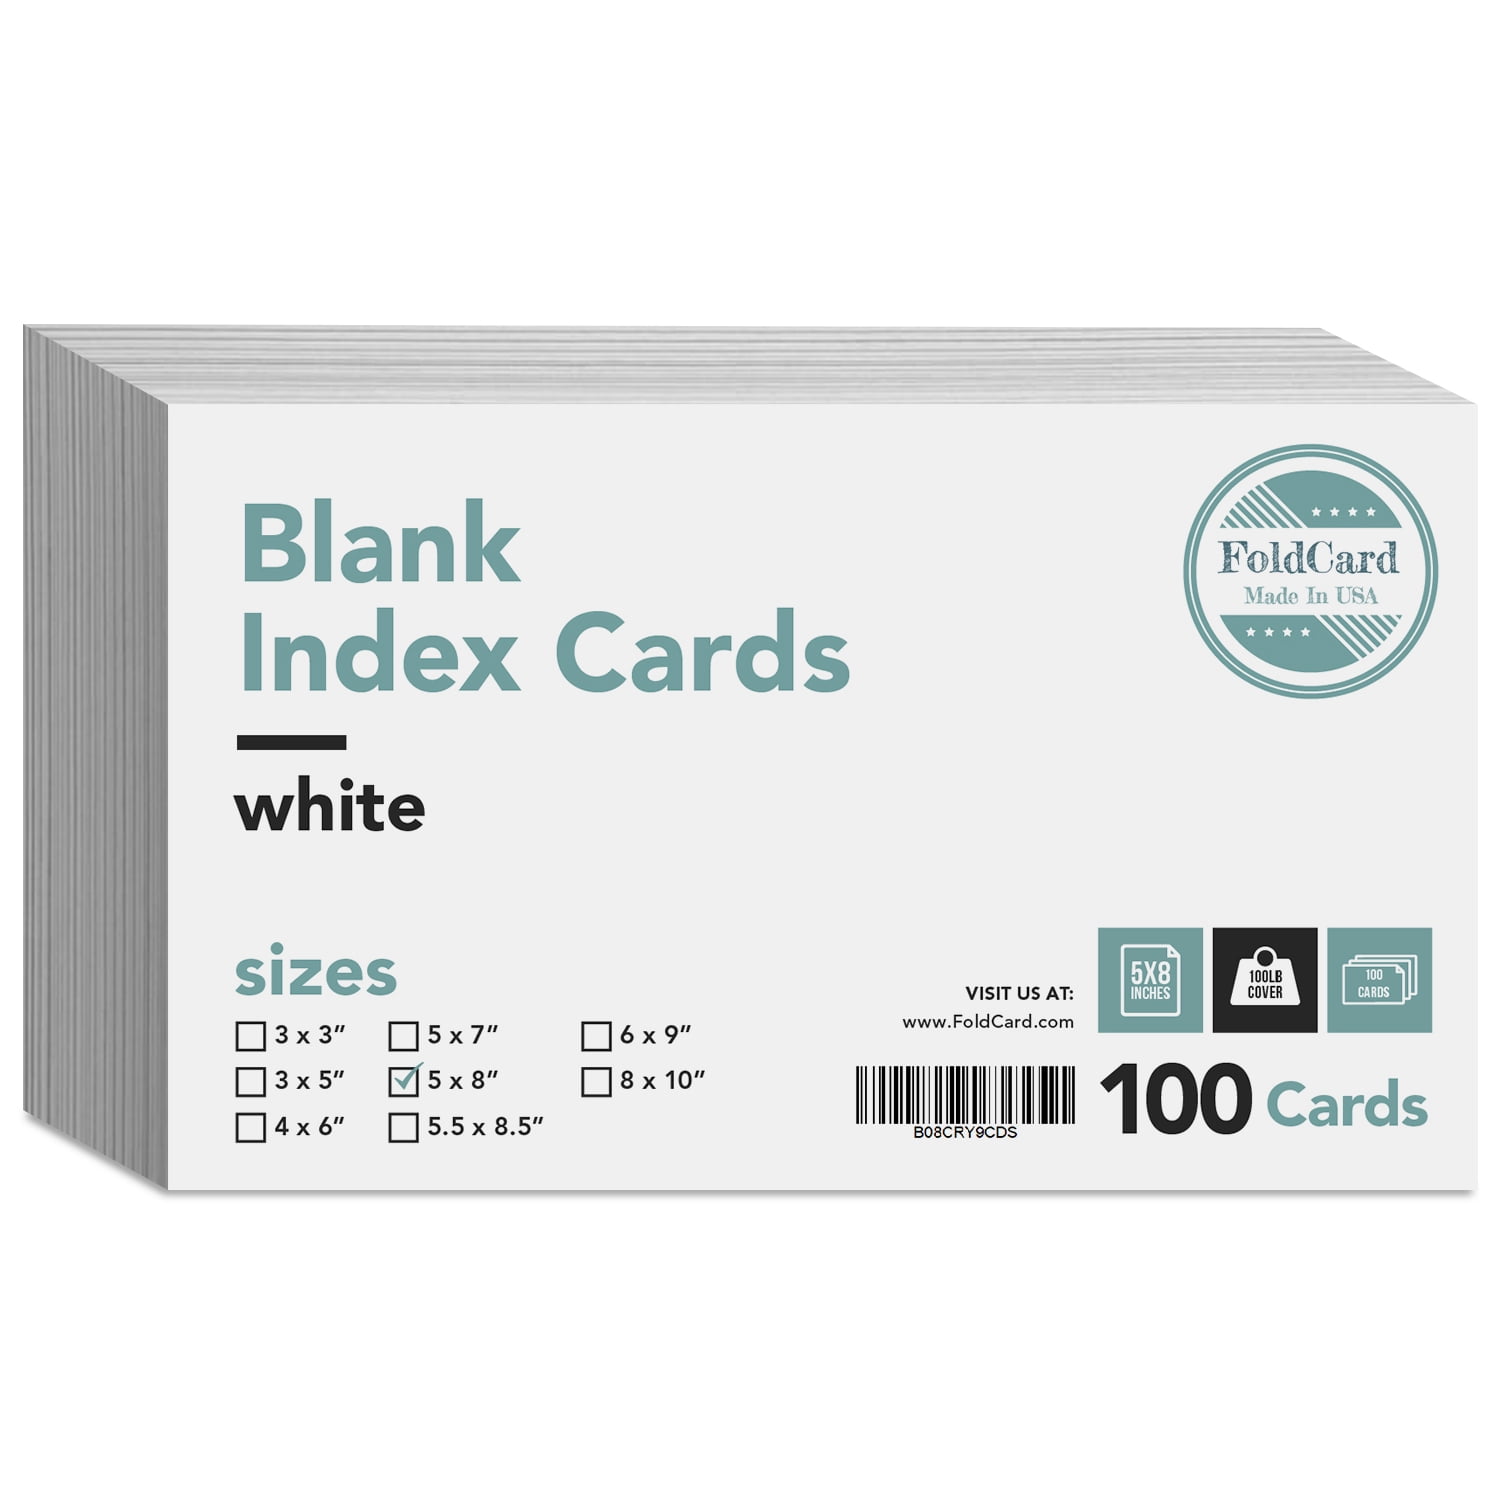 Blank business cards stock photo. Image of advertising - 106093588